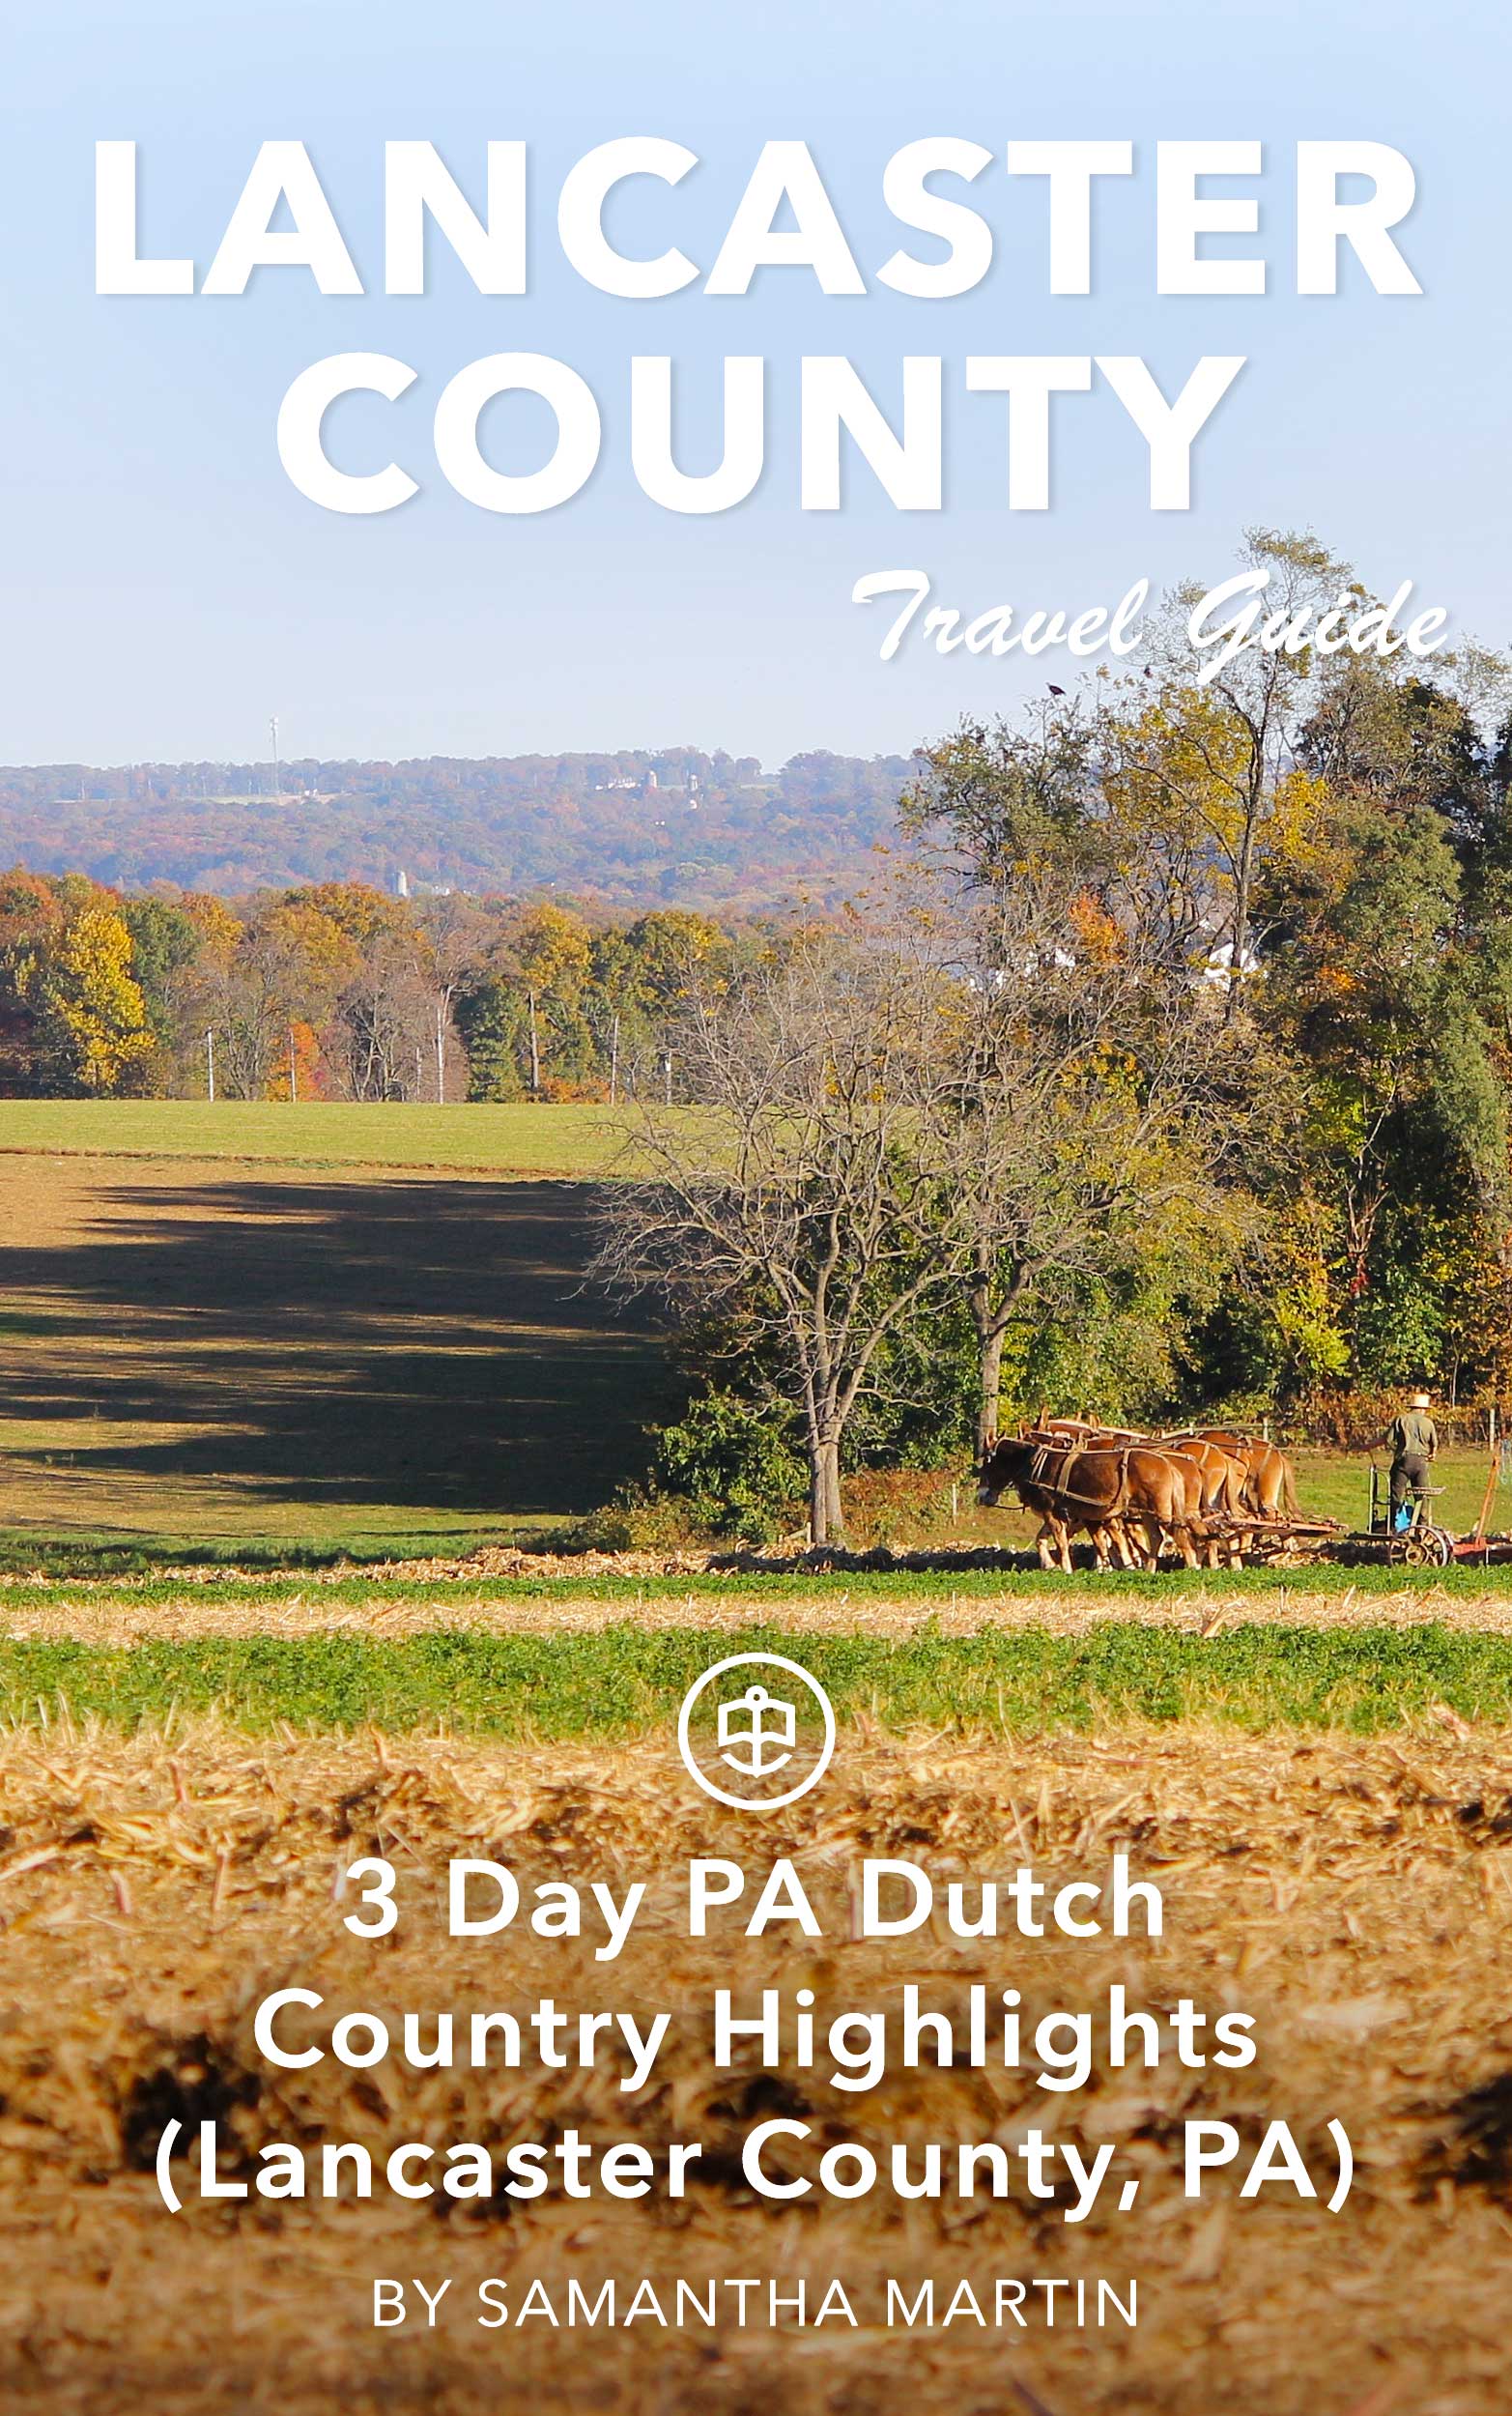 3 Day PA Dutch Country Highlights (Lancaster County, PA)